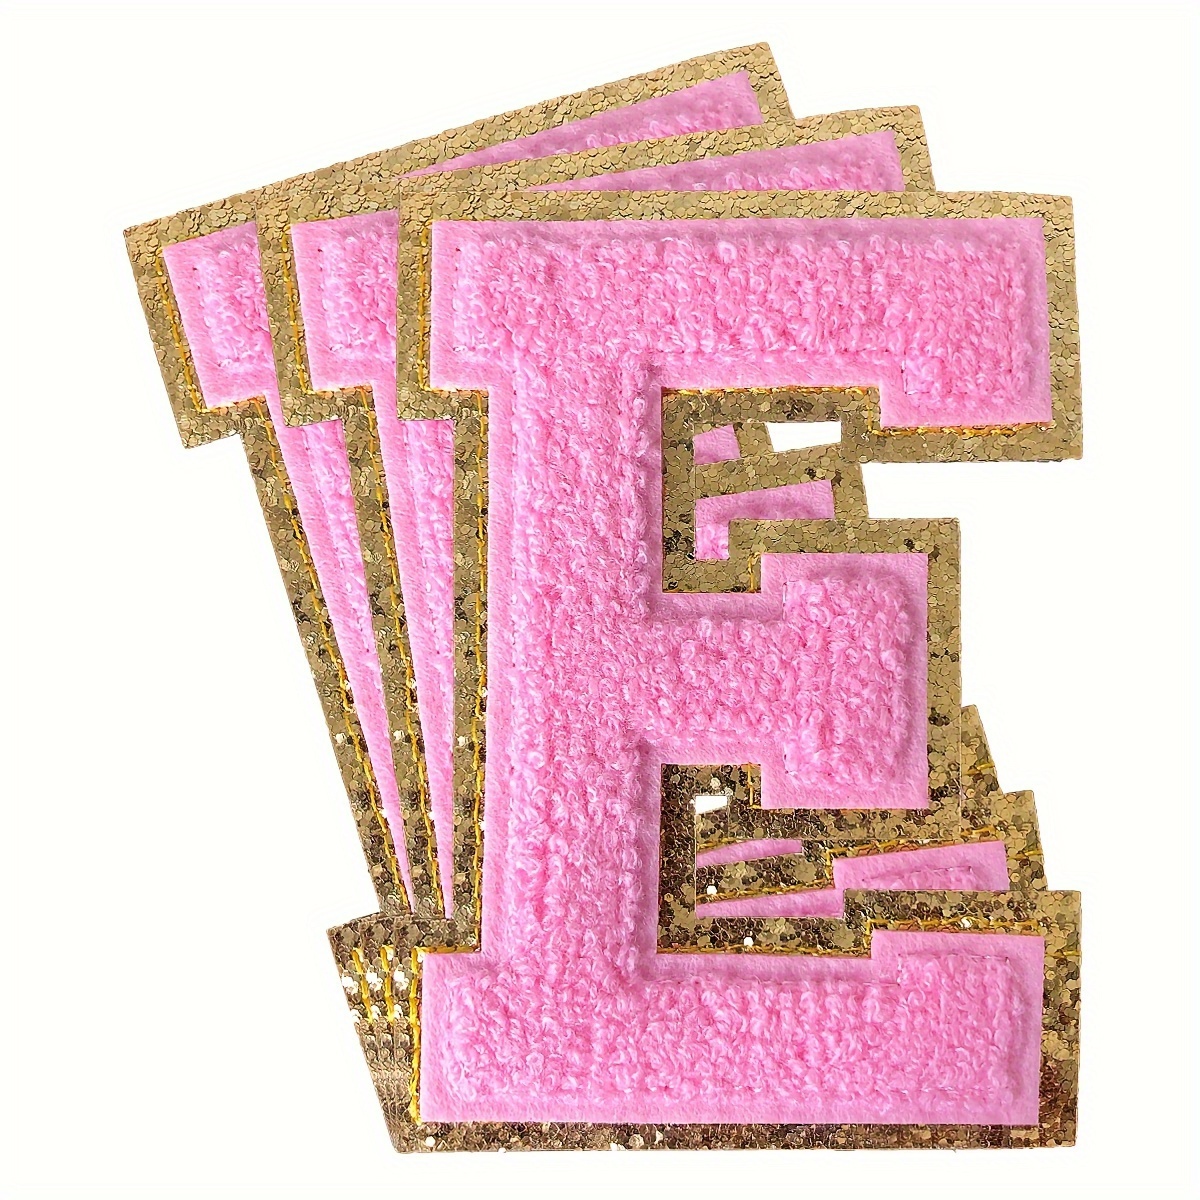 156 Pcs Chenille Glitter Letters Stick-On, Sew- On Colorful Letter Patches